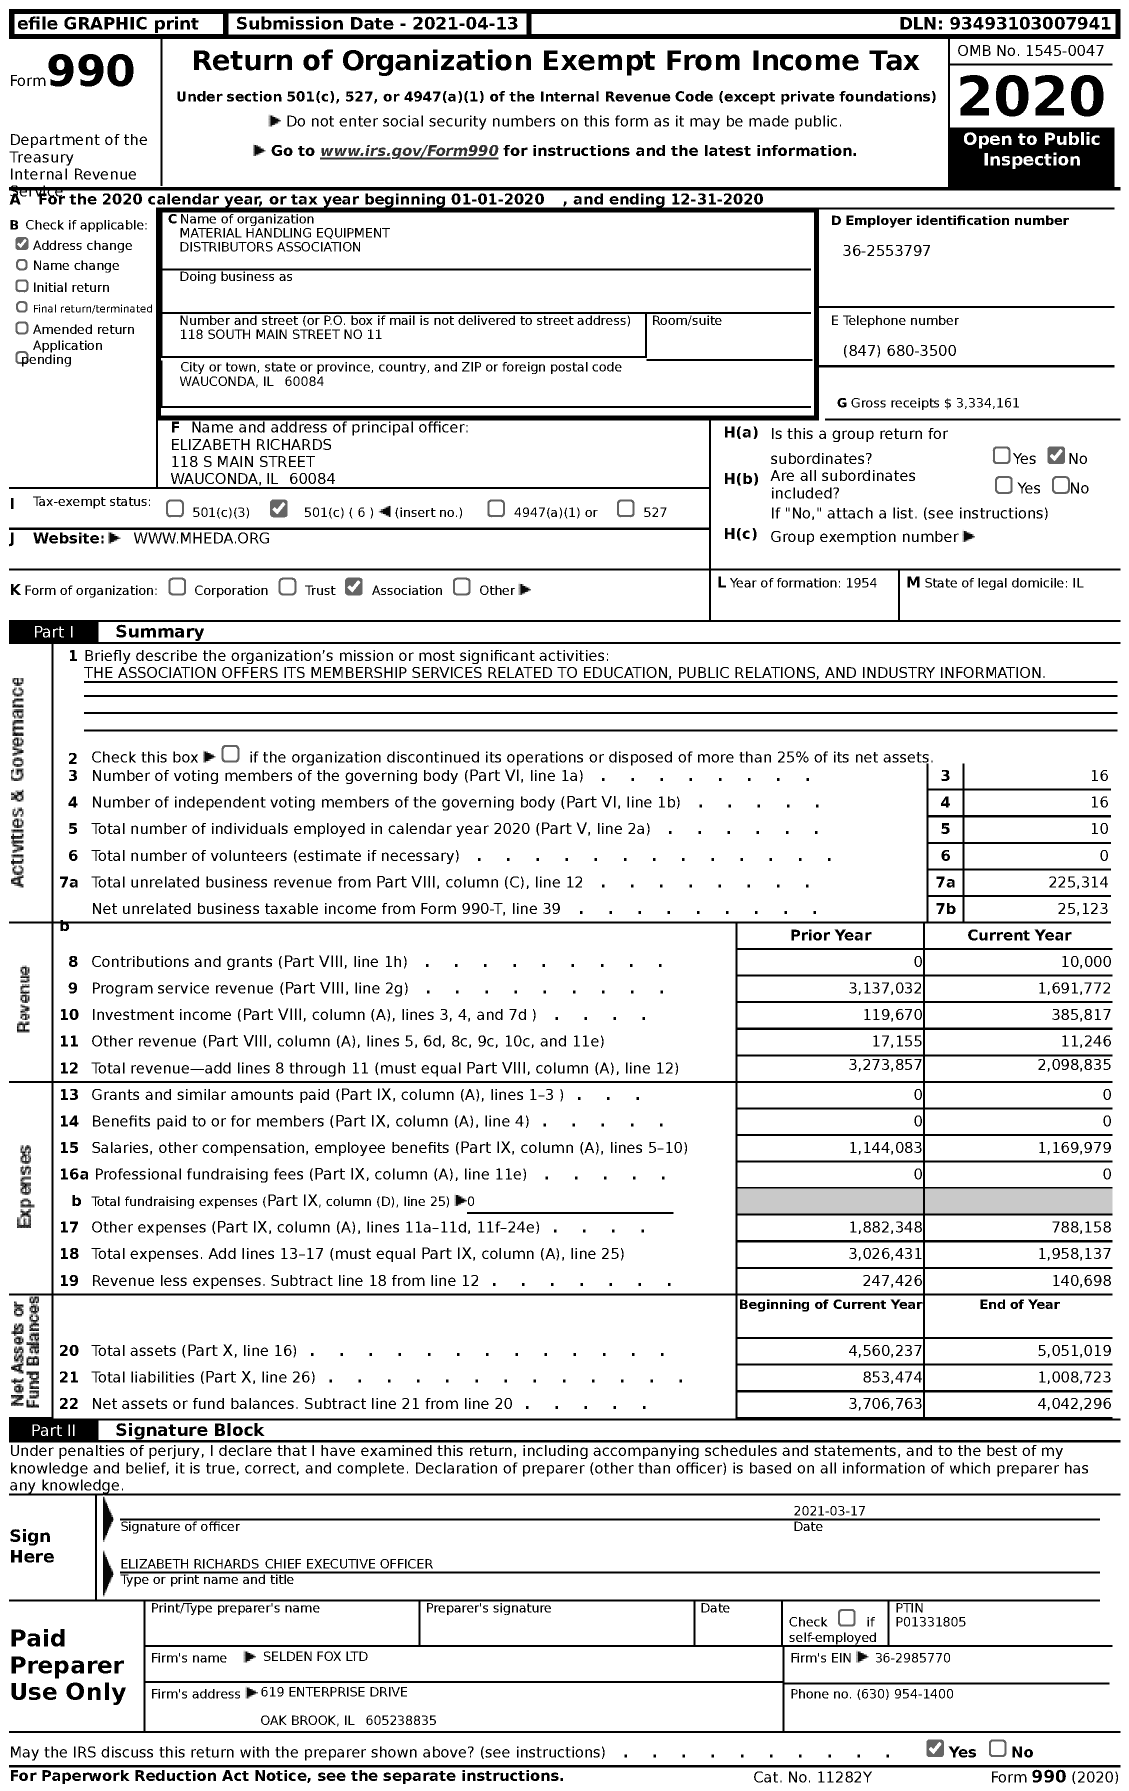 Image of first page of 2020 Form 990 for Material Handling Equipment Distributors Association (MHEDA)